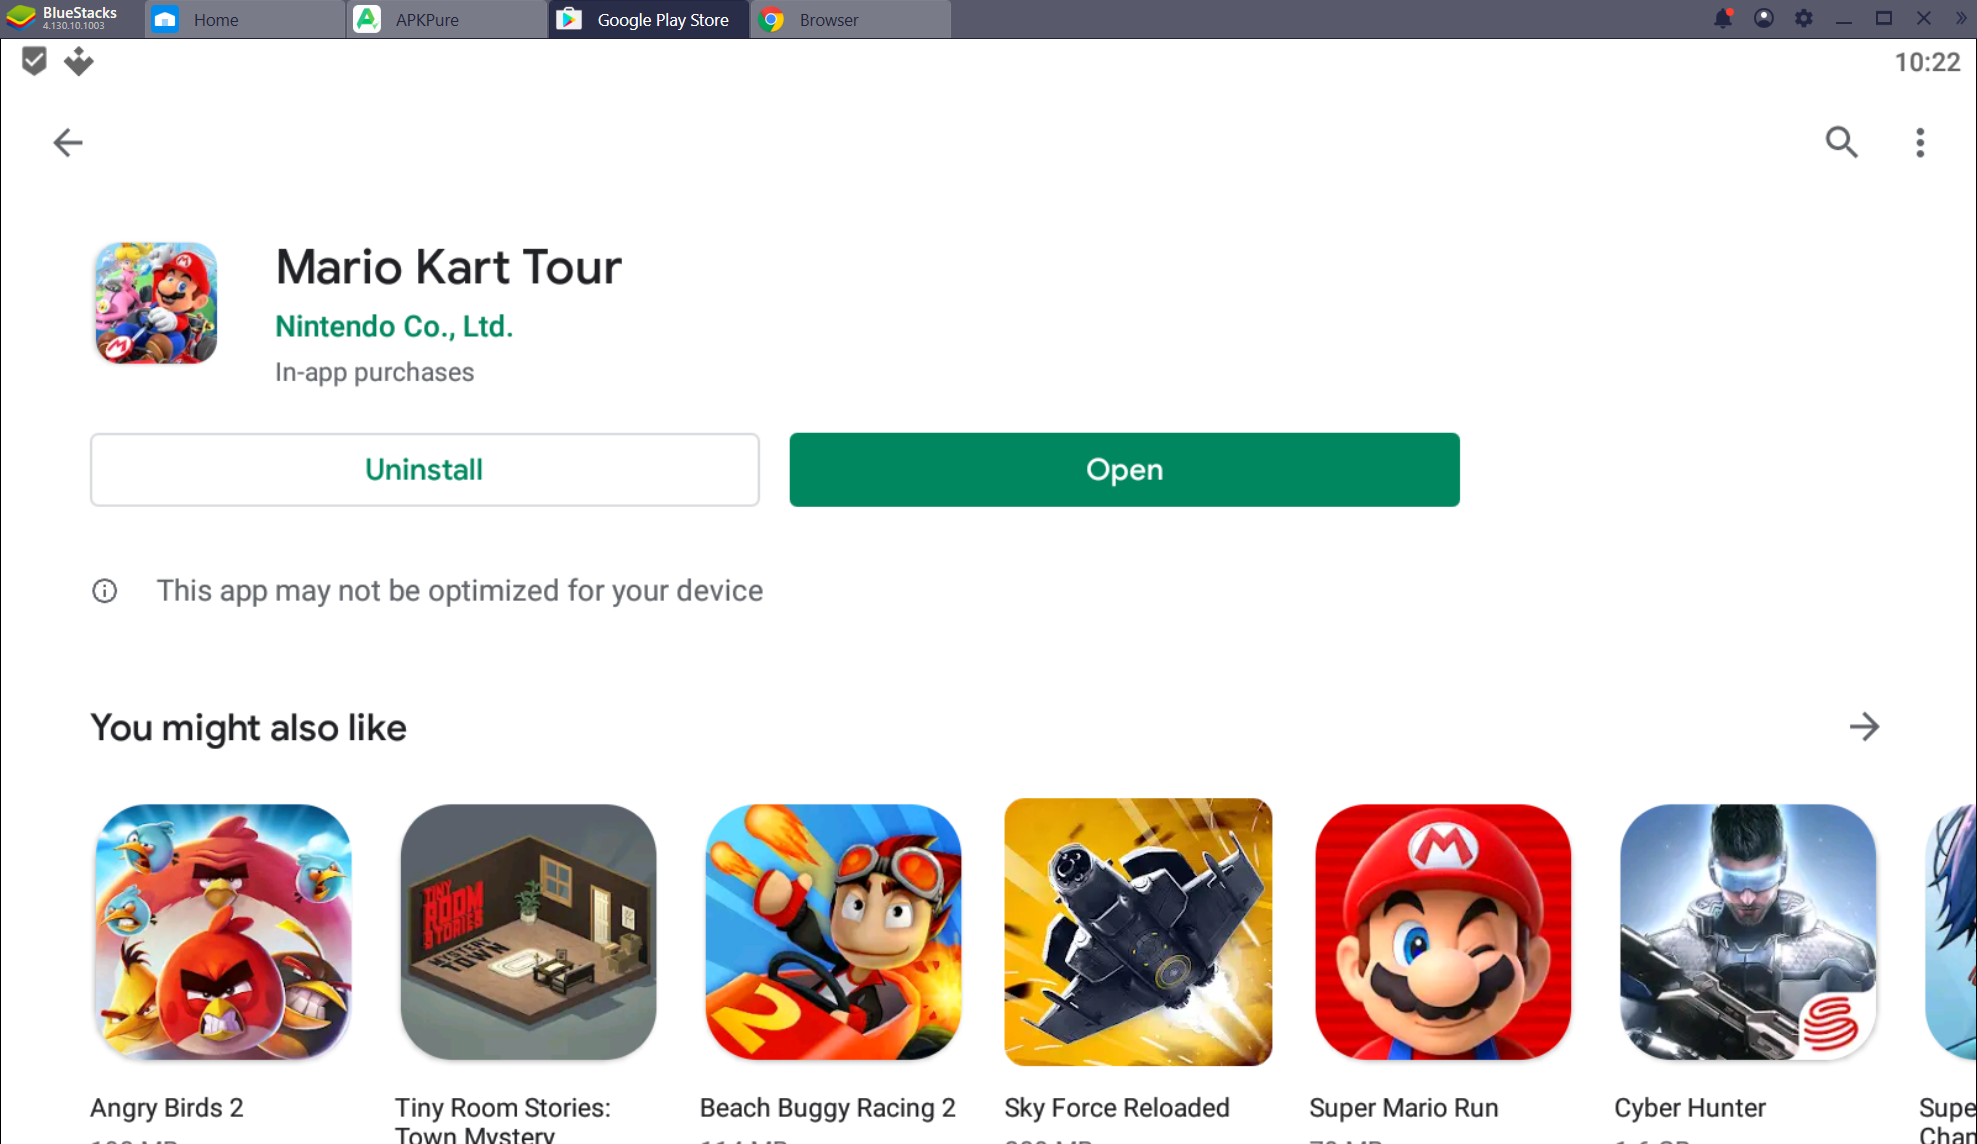 However, with the help of a little trick, you can play Mario Kart Tour on Windows 10 at the least. This is the guide to download, install, and play Mario Kart Tour on Windows 10.